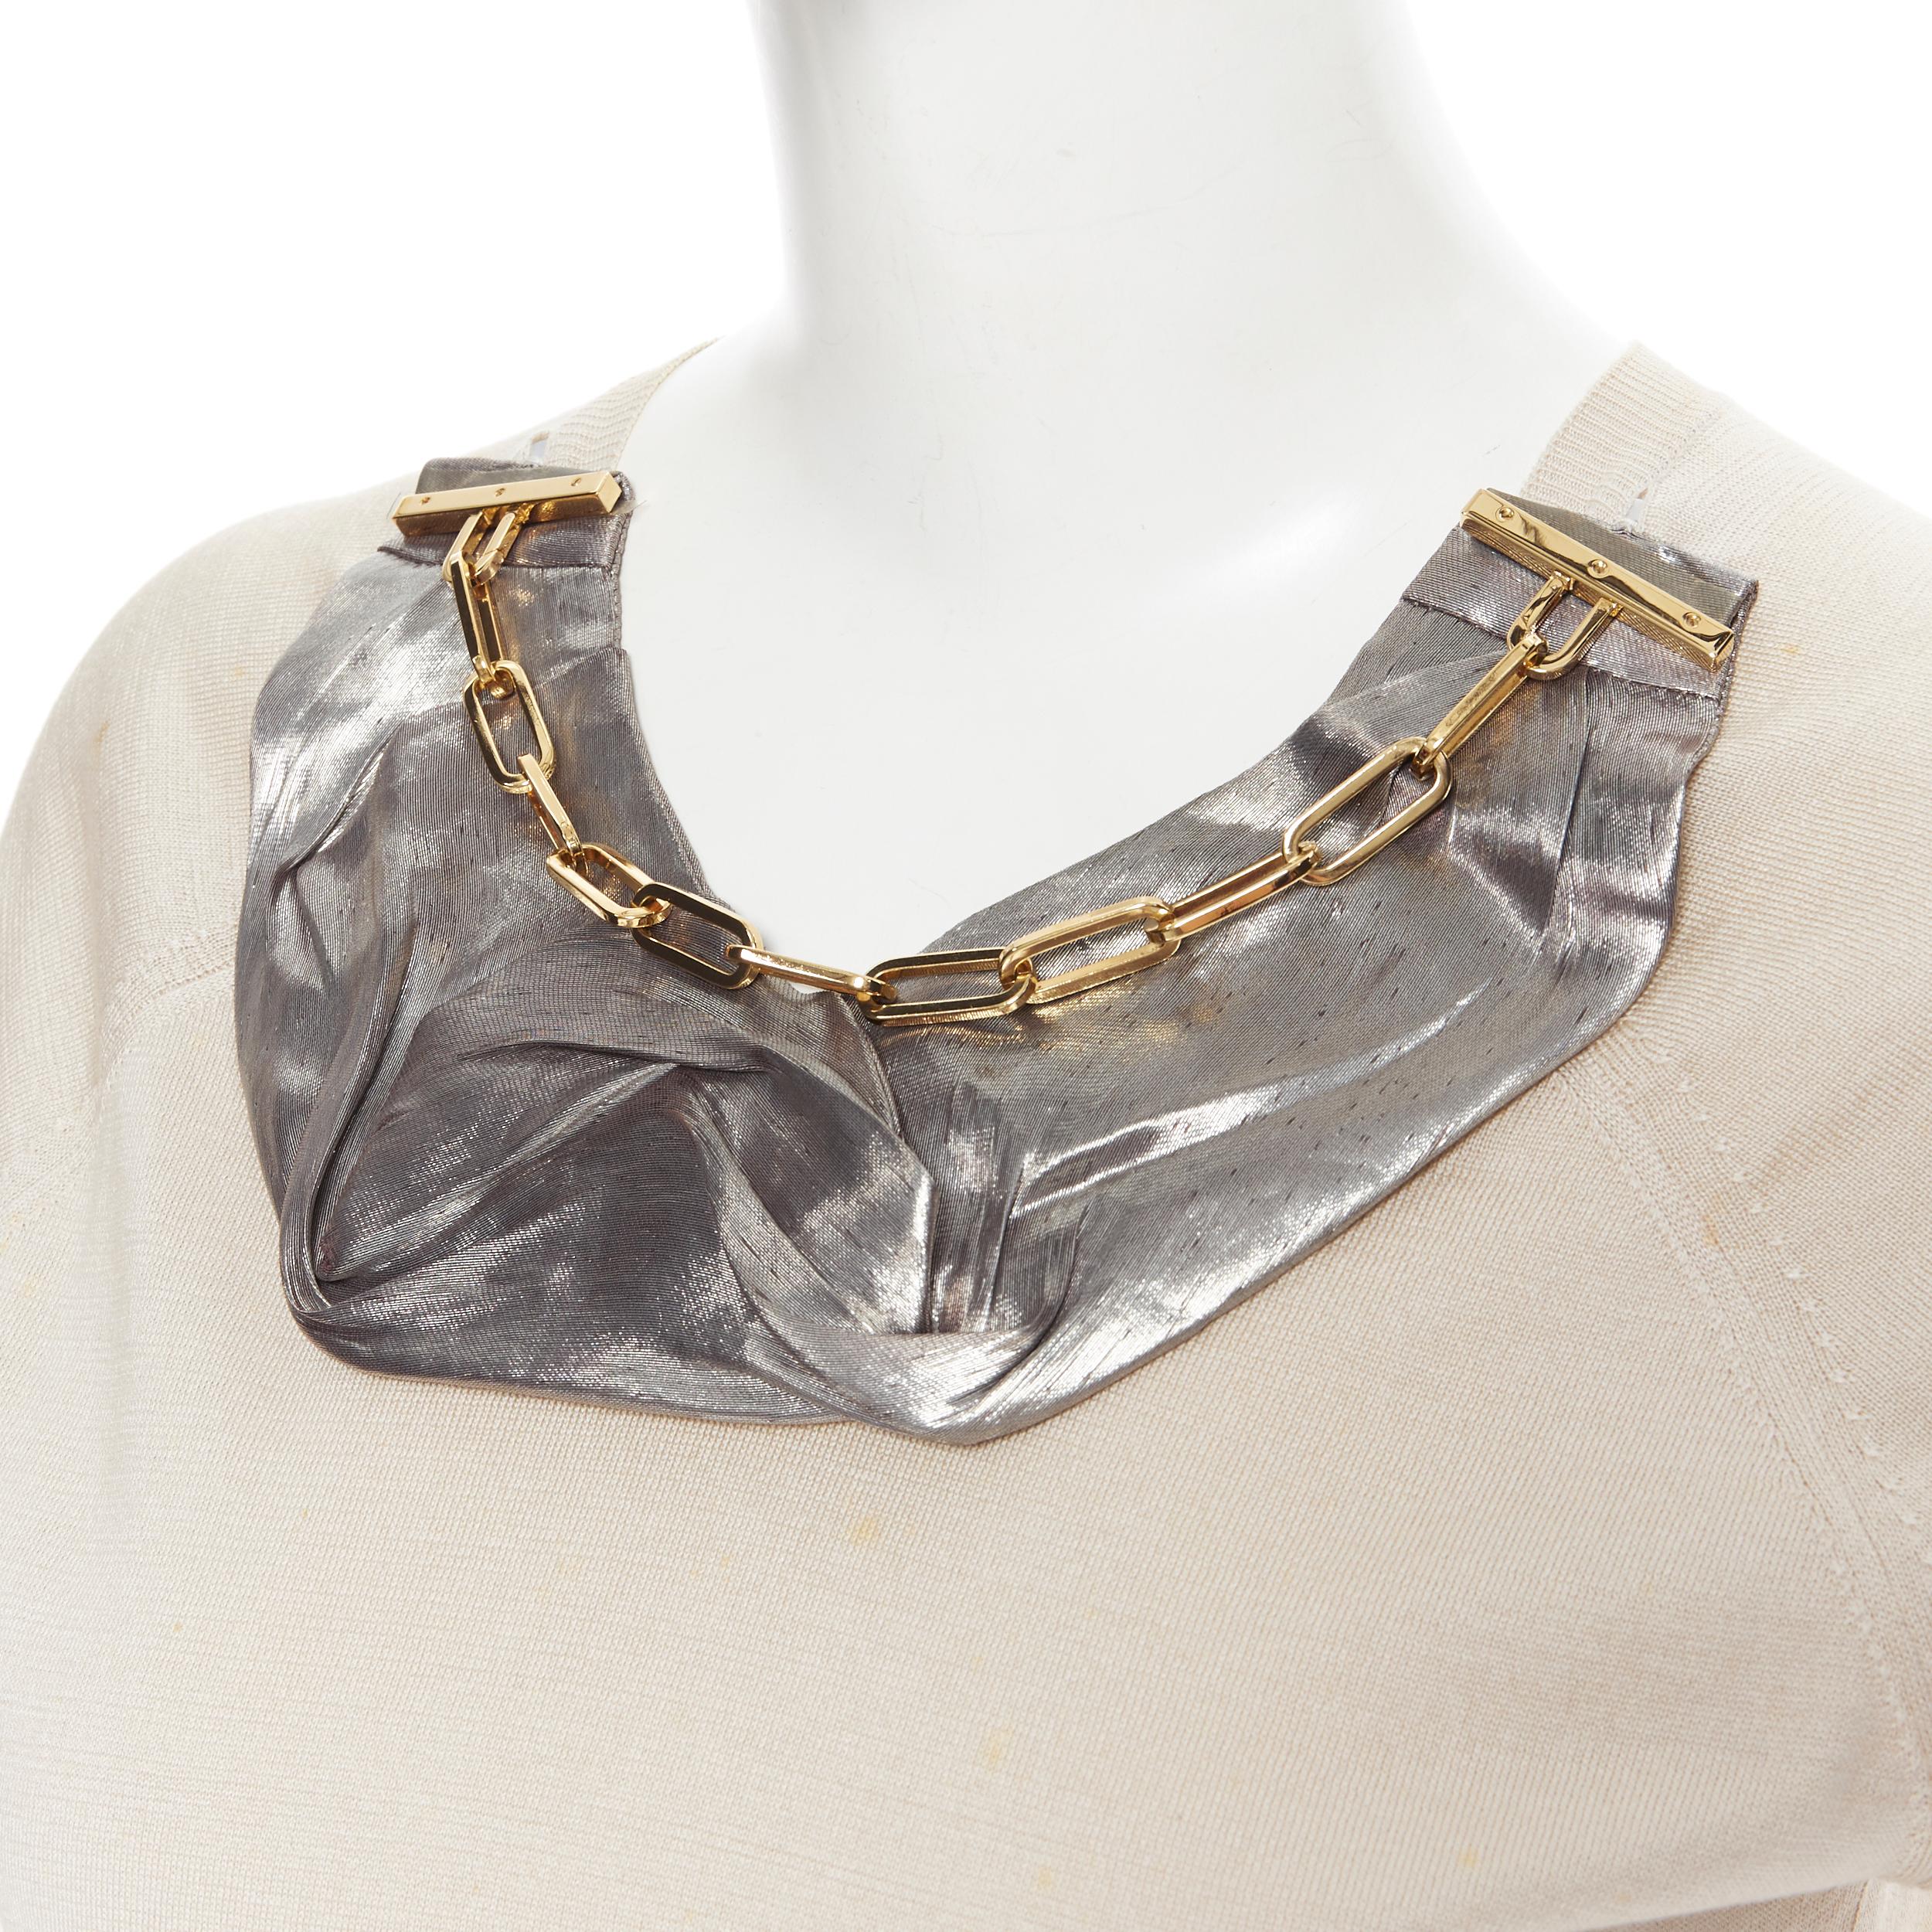 LOUIS VUITTON beige silk cotton knit gold chain necklace pullover top XS 
Reference: LNKO/A01688 
Brand: Louis Vuitton 
Material: Silk 
Color: Beige 
Pattern: Solid 
Extra Detail: Gold tone chunky chain necklace. 
Made in: Italy 

CONDITION: